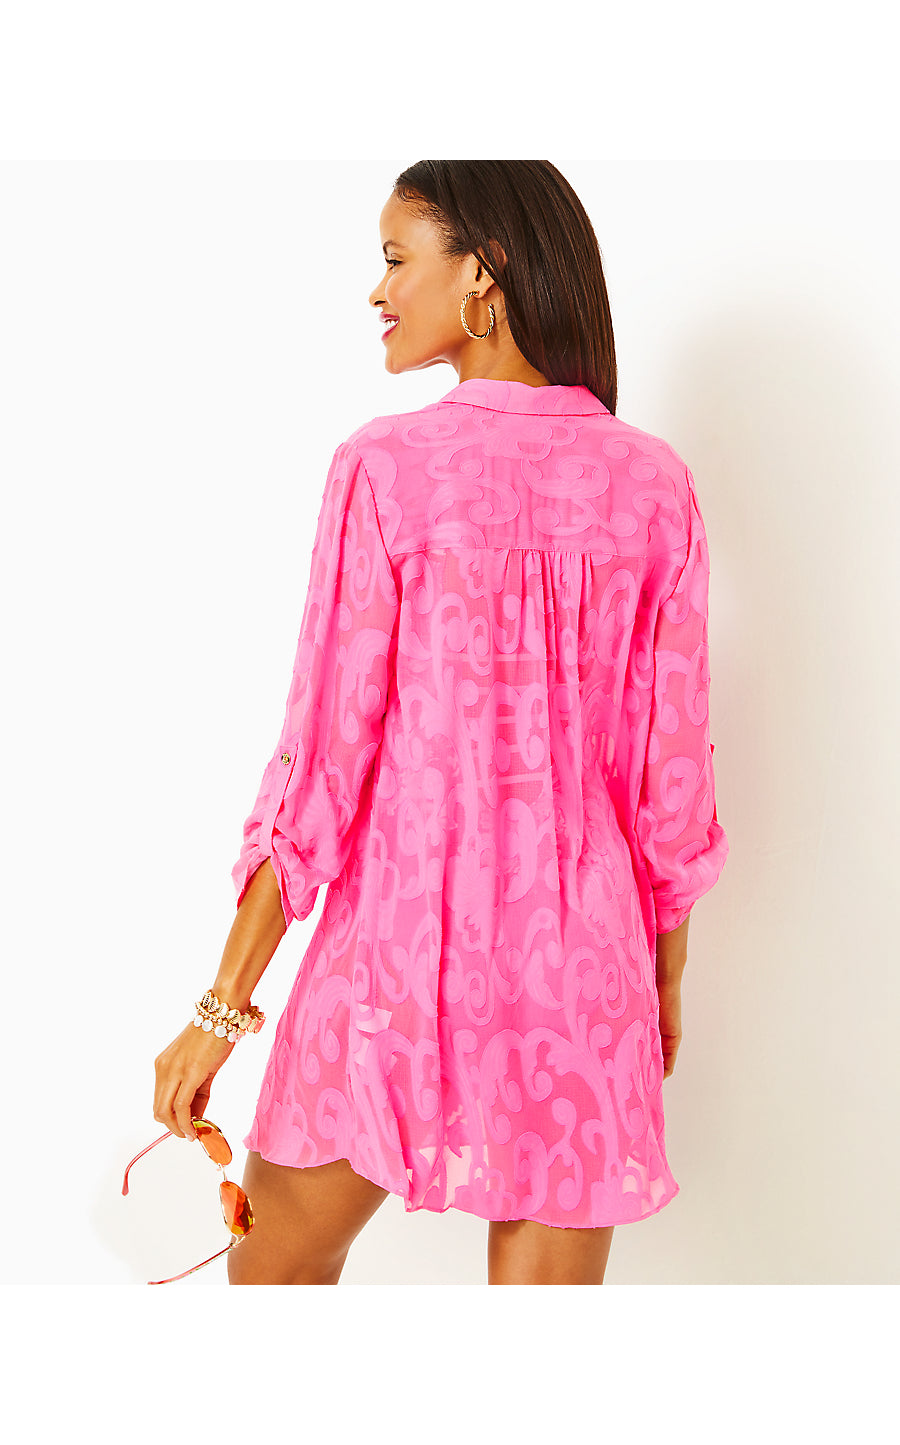 NATALIE COVERUP - ROXIE PINK - POLY CREPE SWIRL CLIP